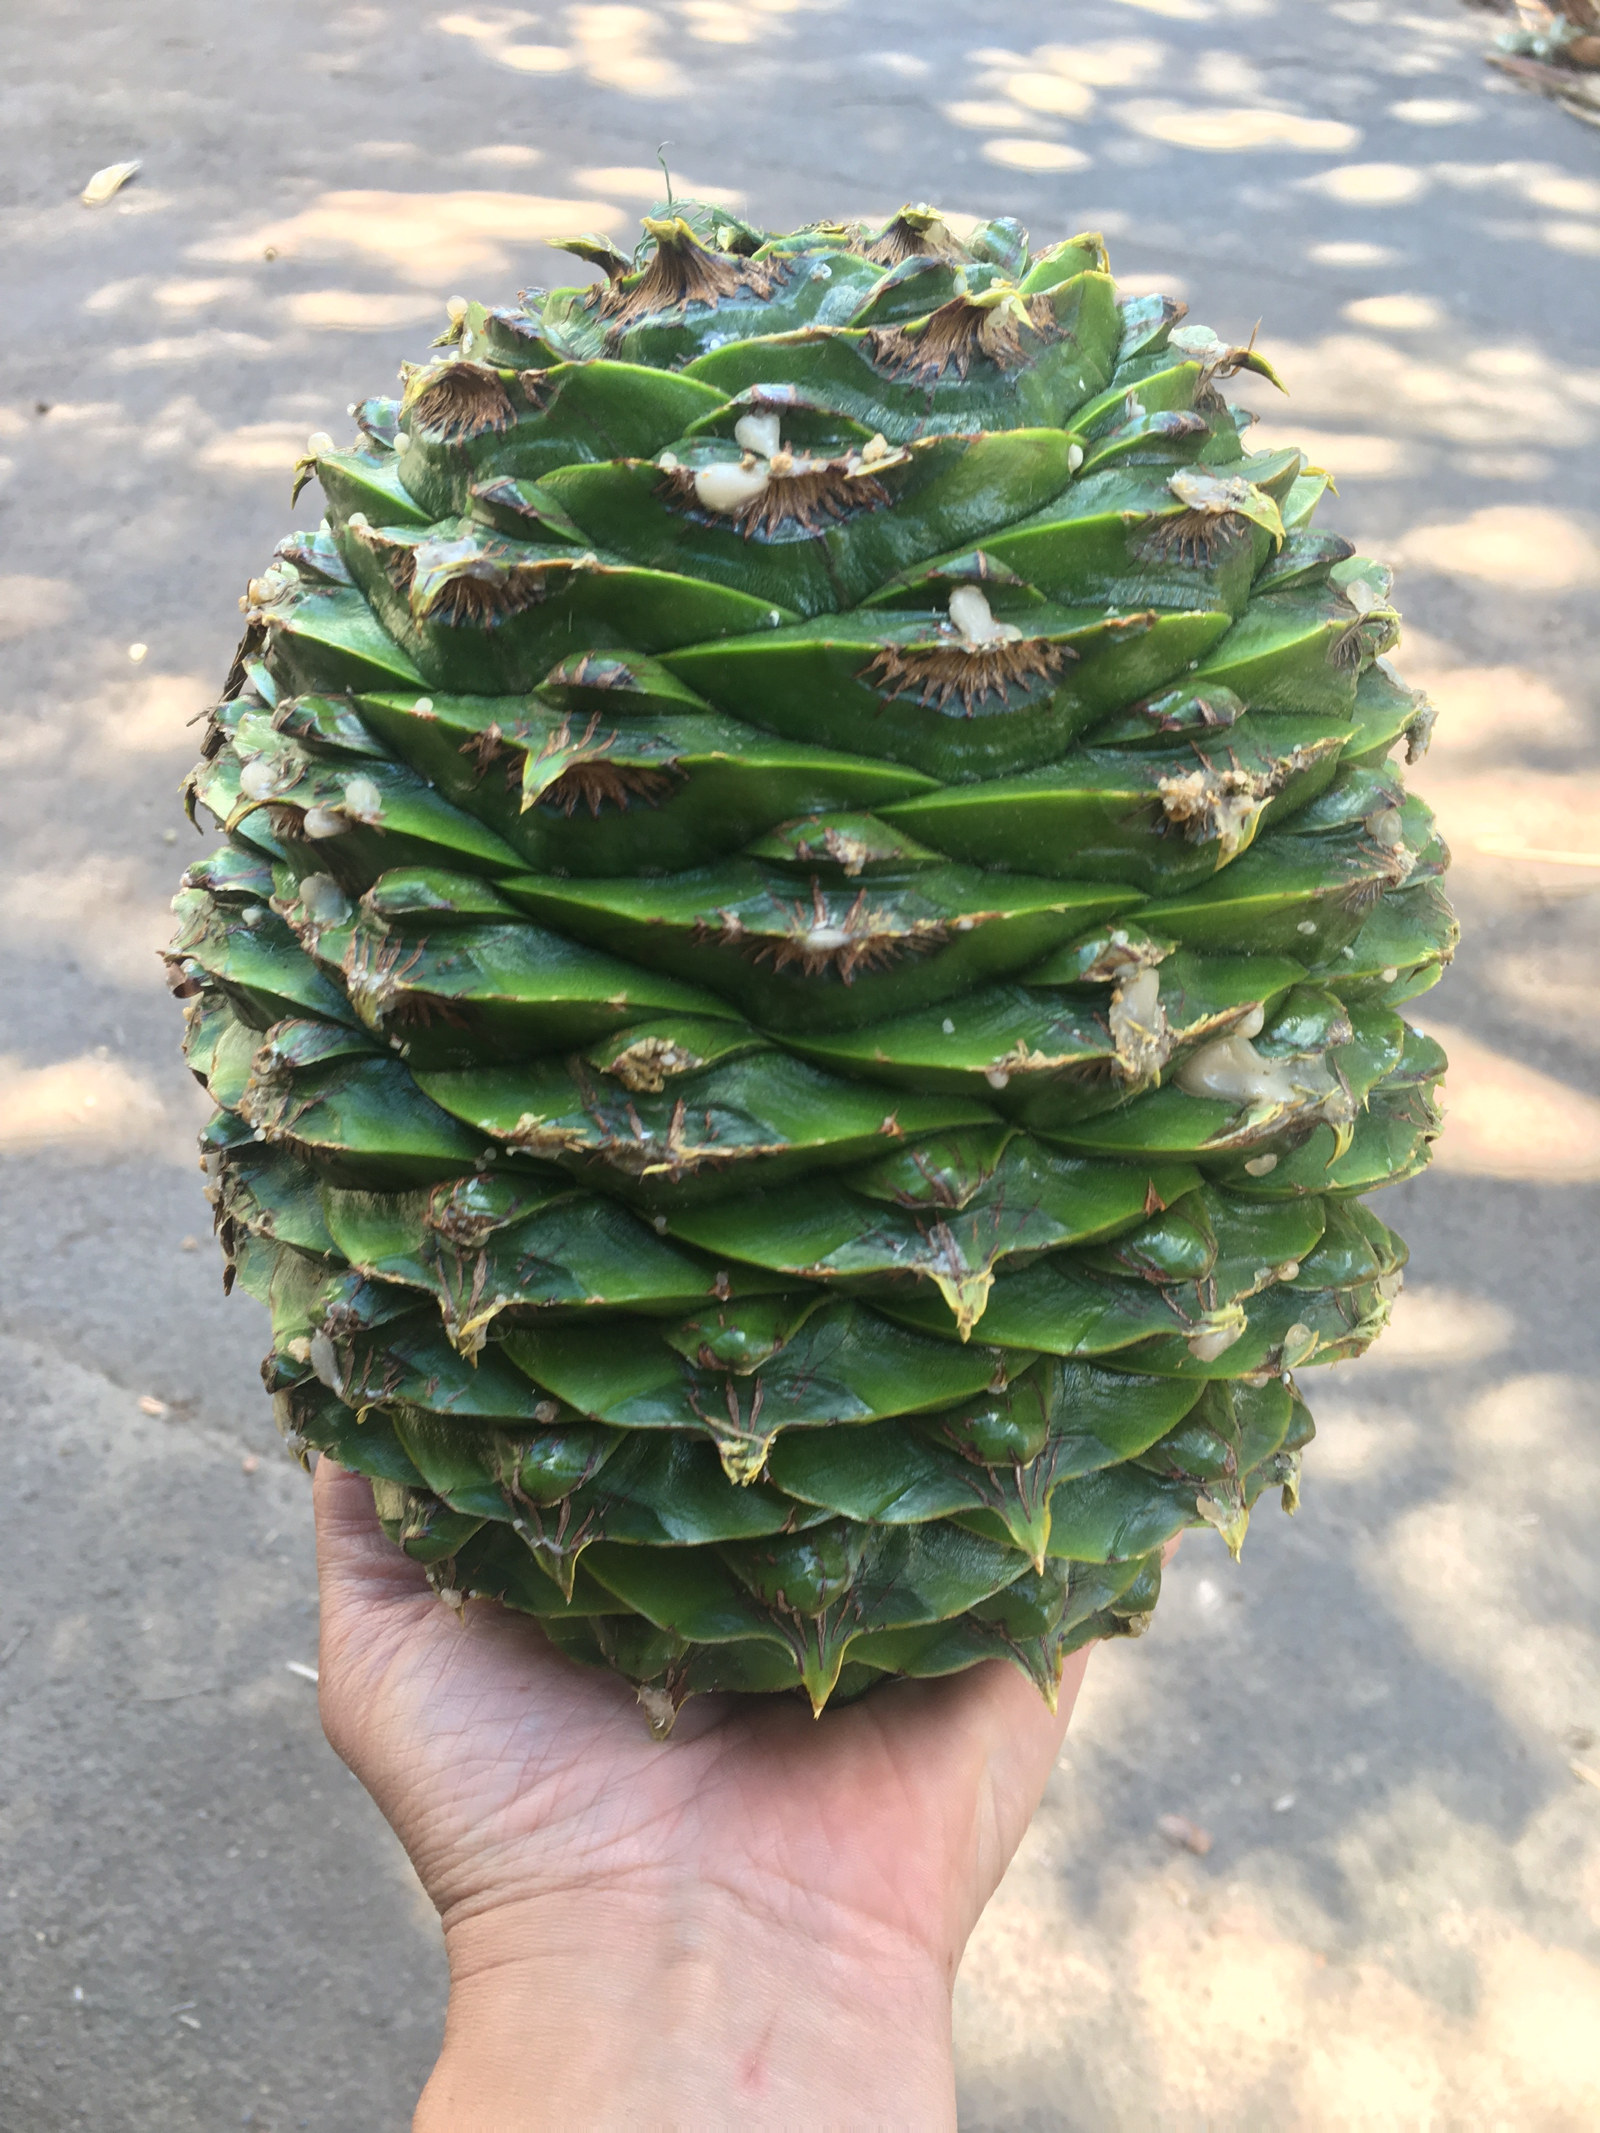 The large size of the Bunya cone is show in the hand of Steve Halliday